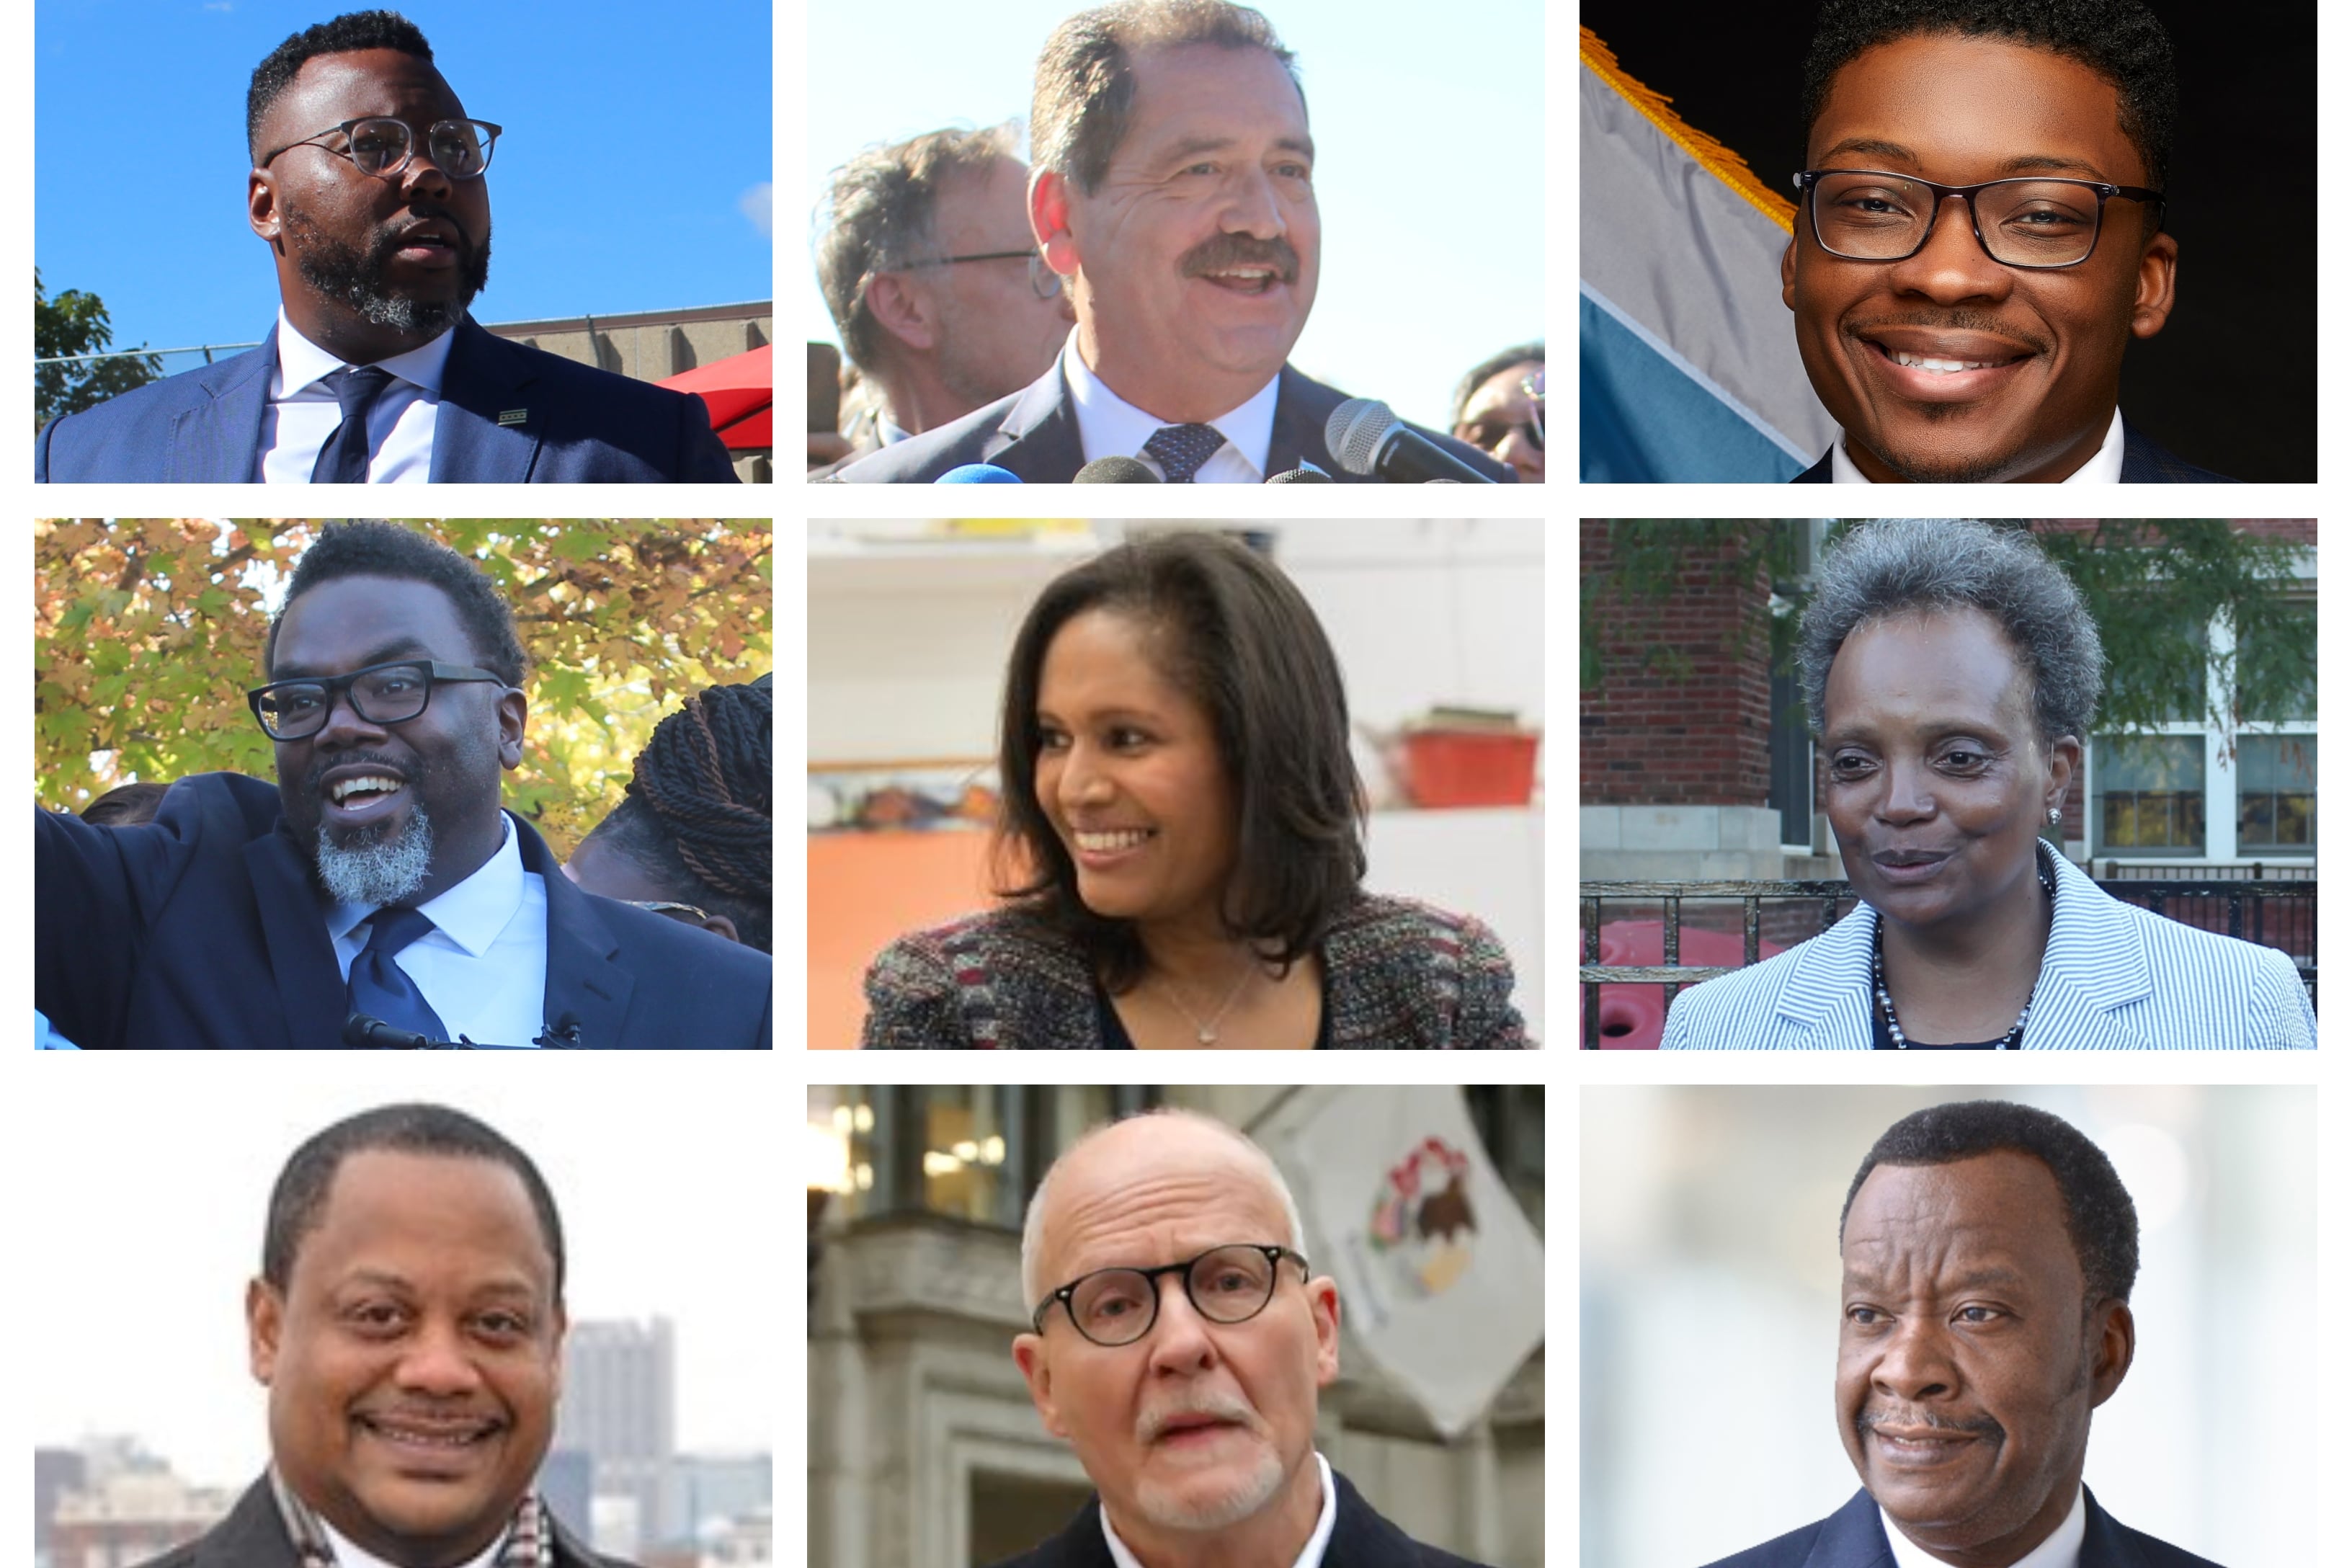 A collage of the nine candidates running for Chicago mayor.